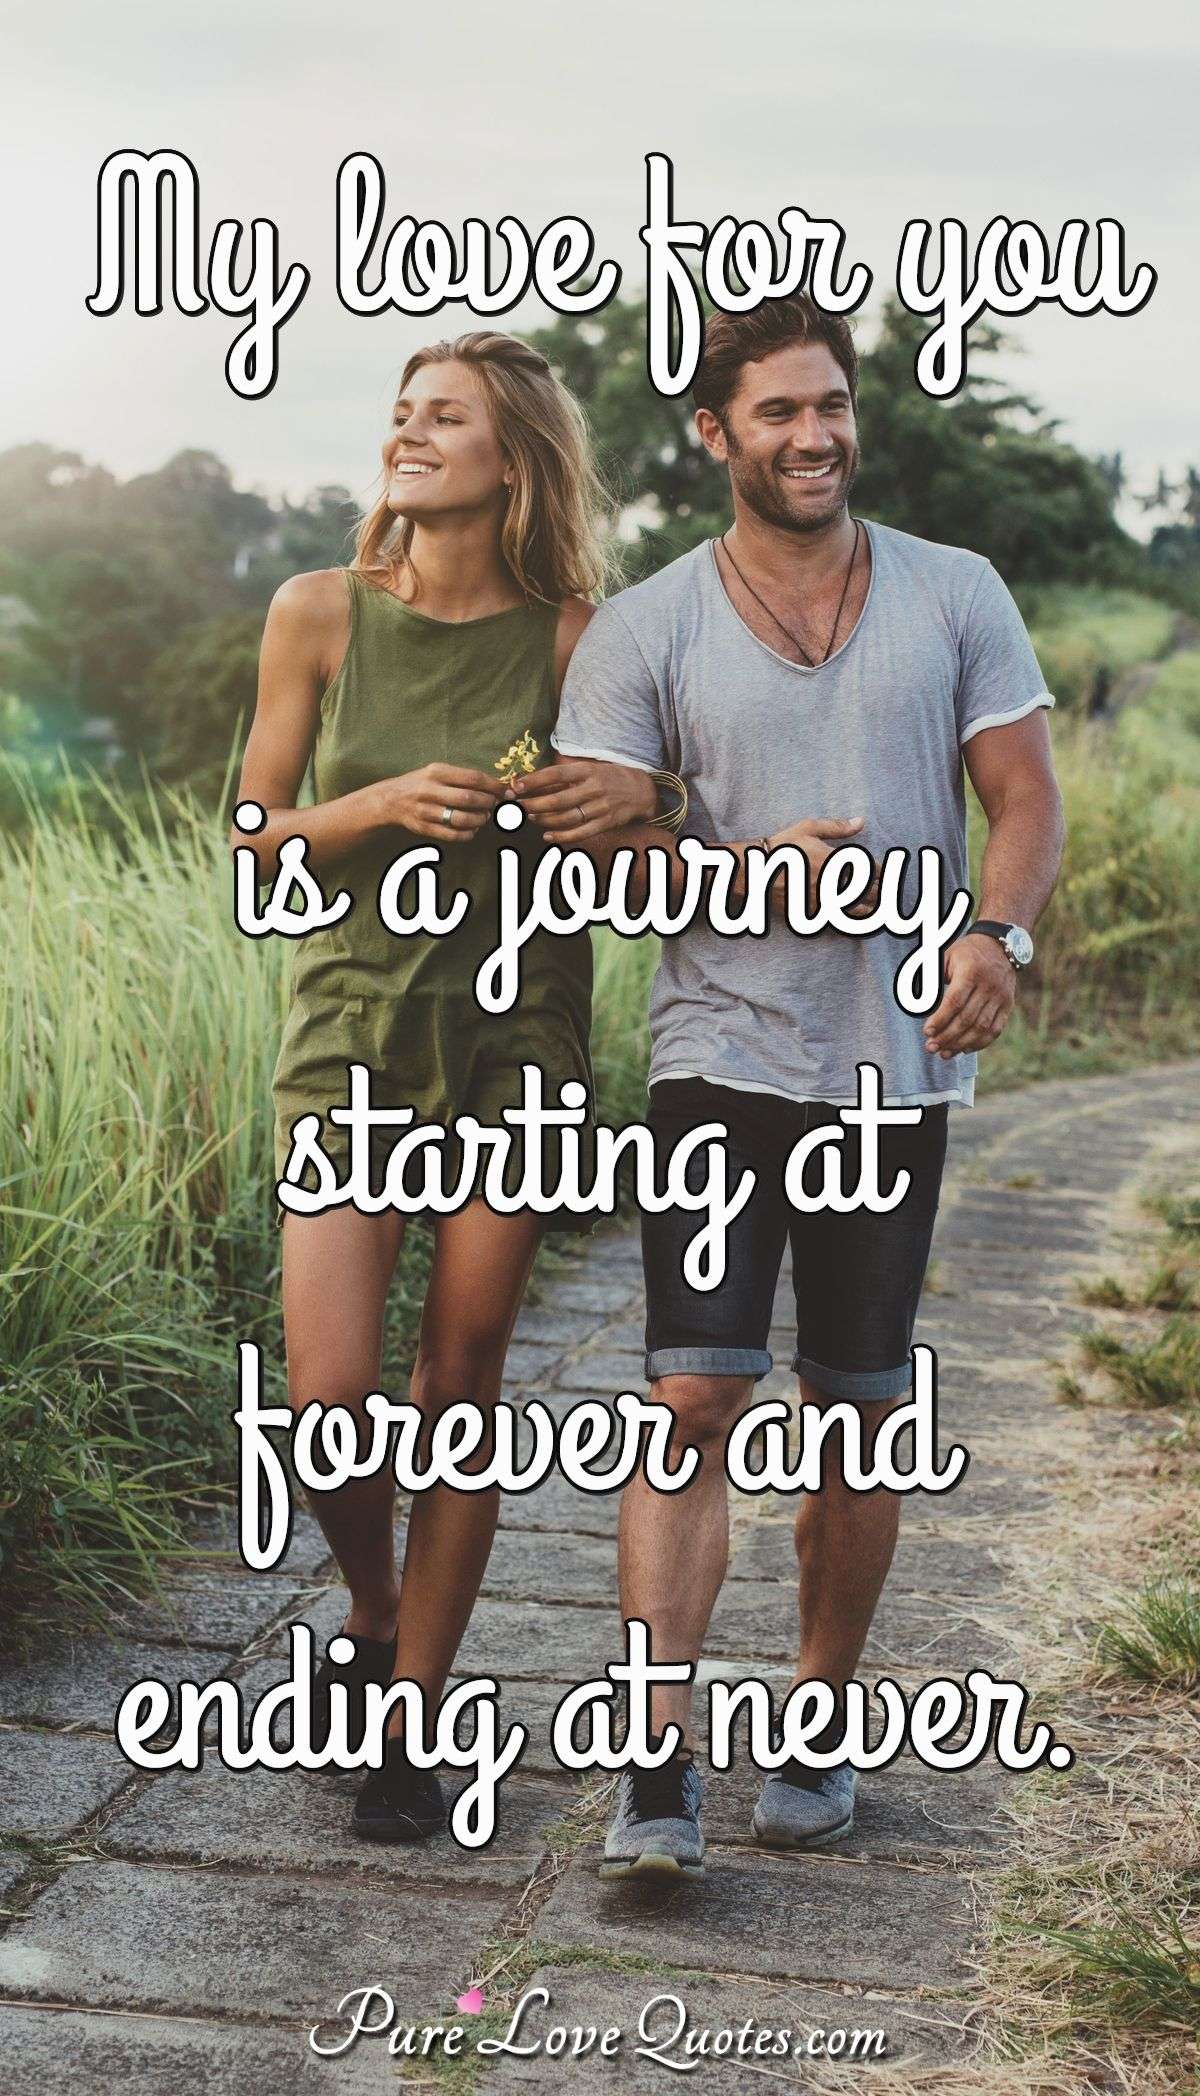 My love for you is a journey starting at forever and ending at never. - Anonymous